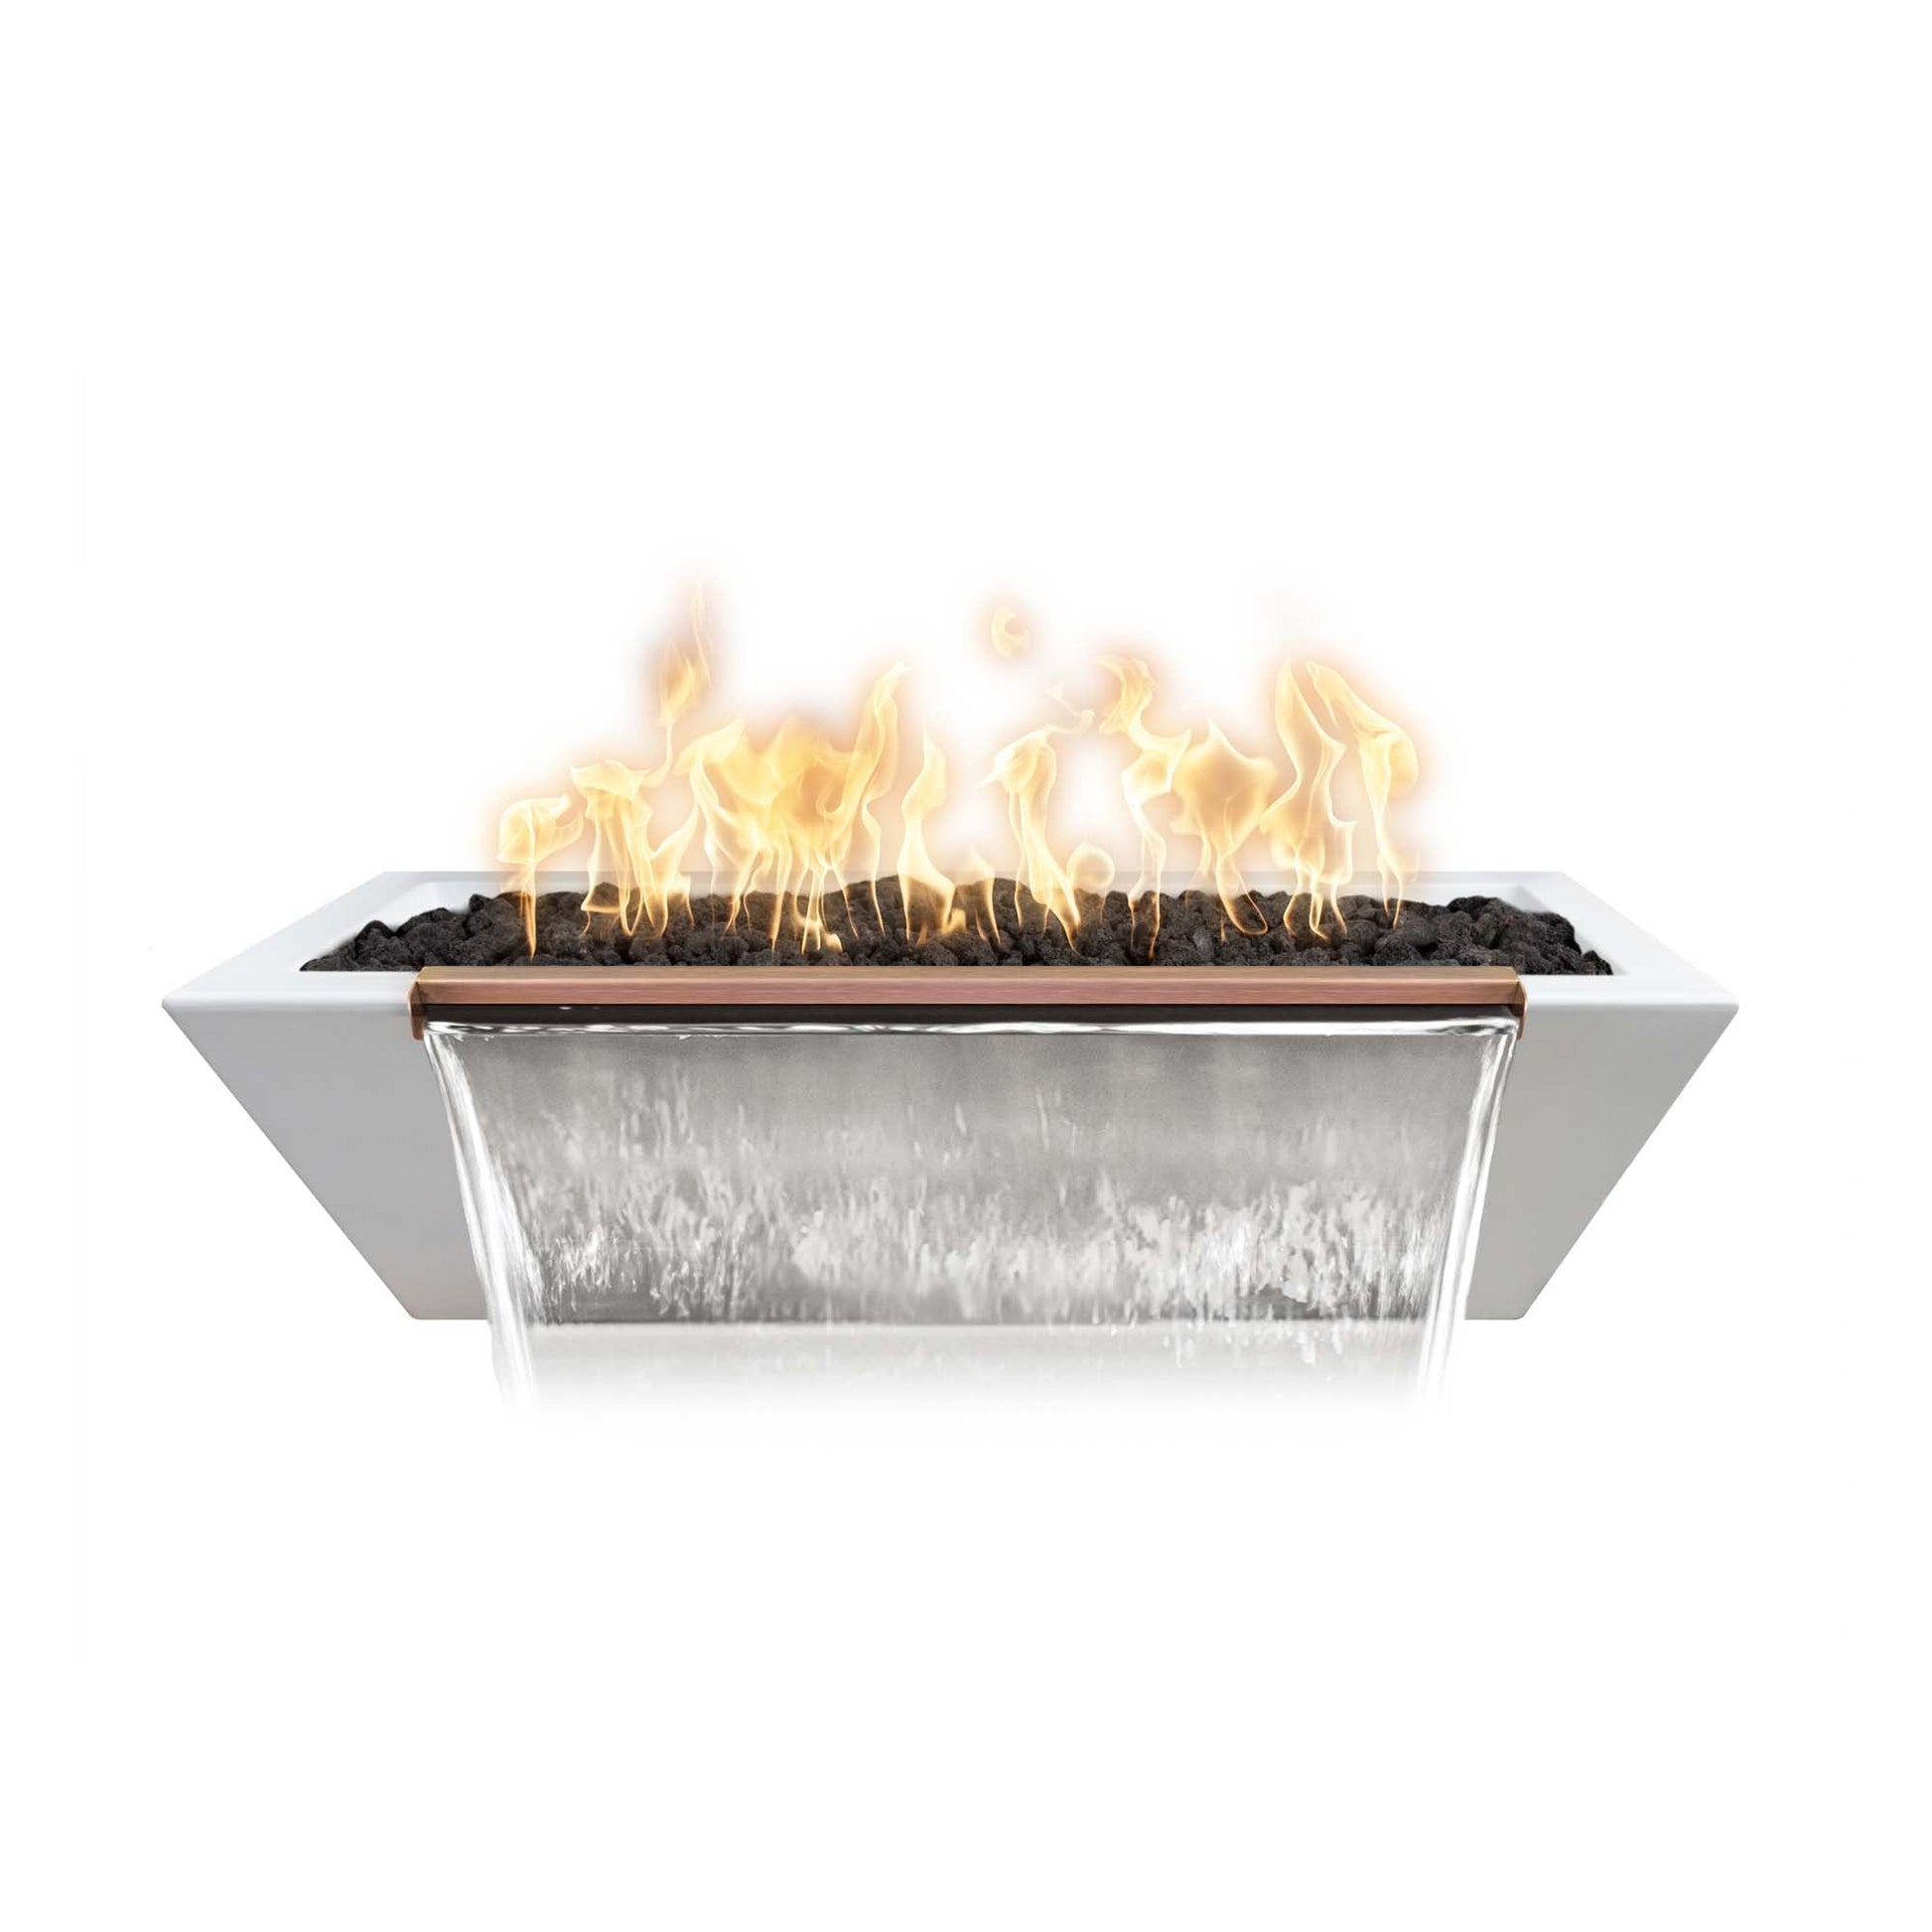 The Outdoor Plus Linear Maya 48" Ash GFRC Concrete Liquid Propane Fire & Water Bowl with Match Lit with Flame Sense Ignition